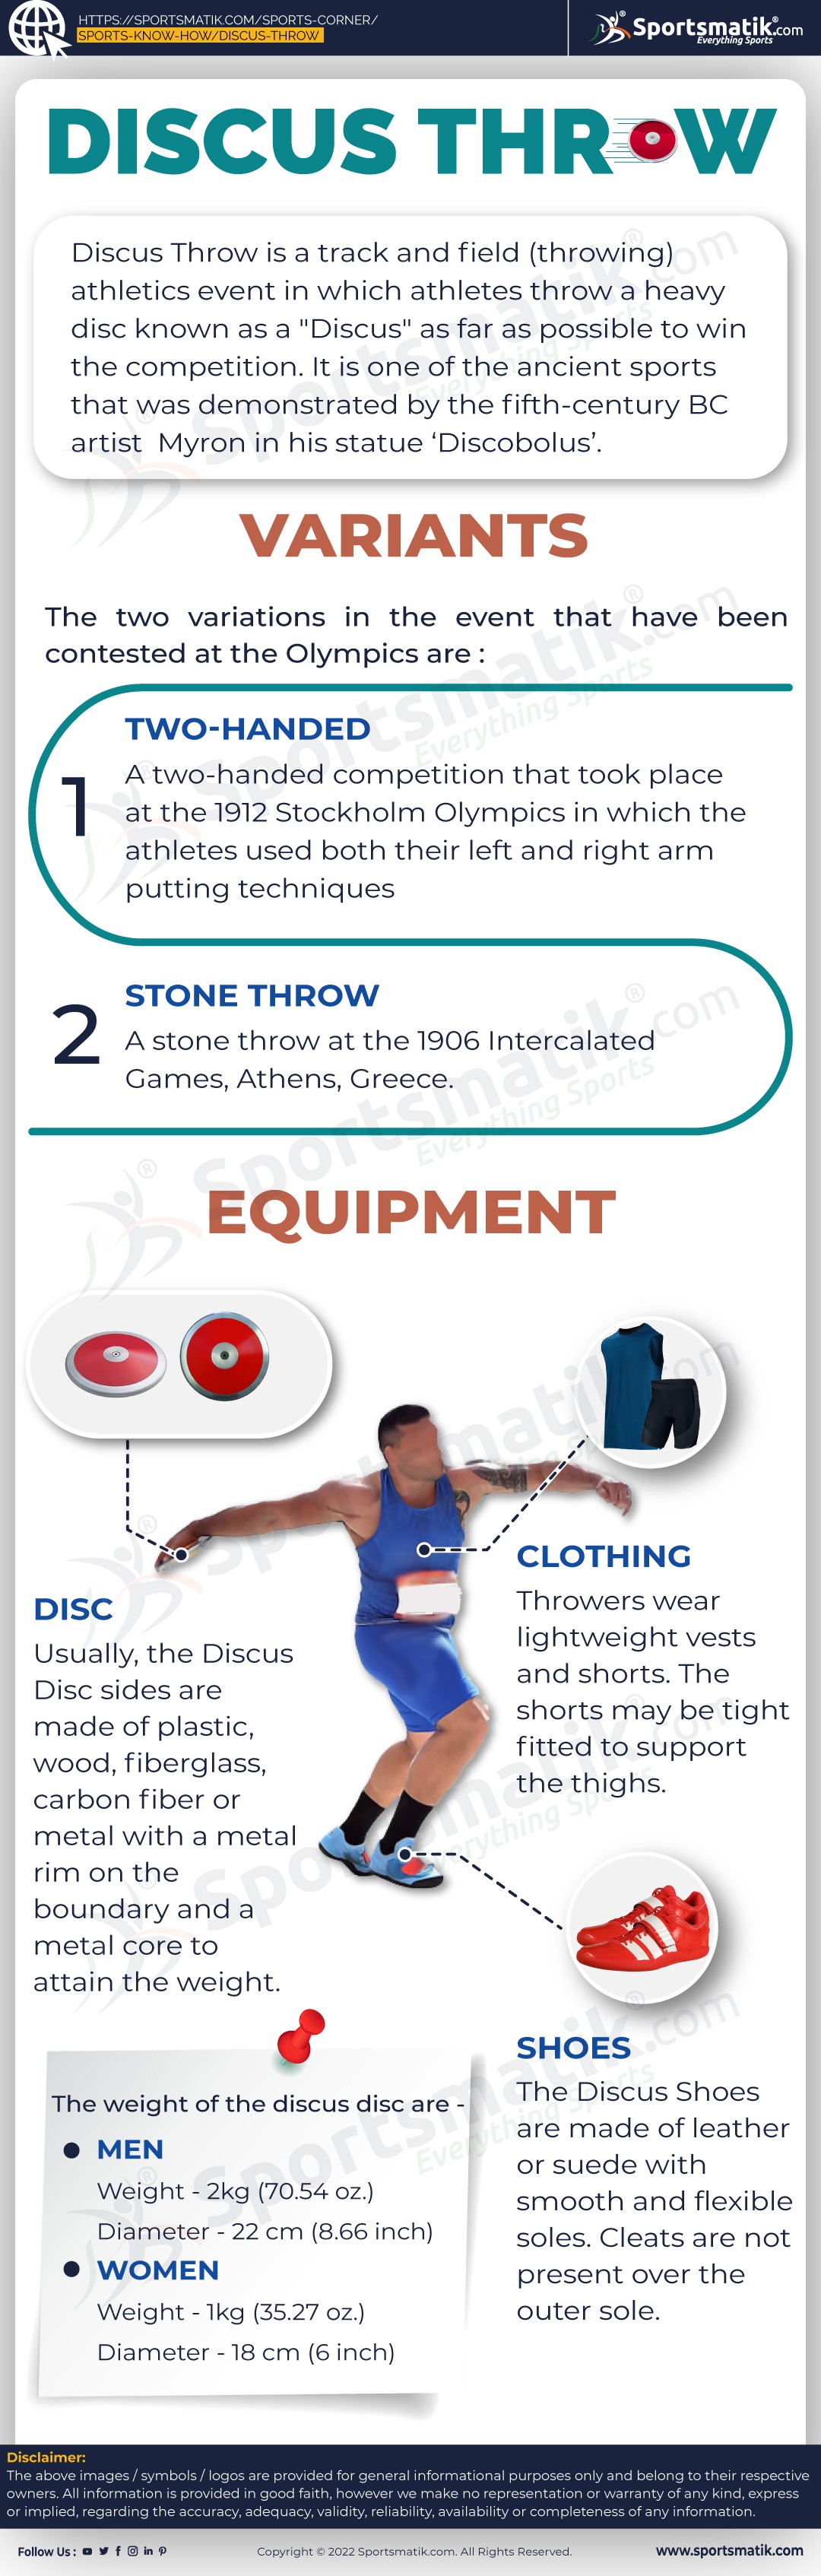 Discus Throw Variants and Equipment